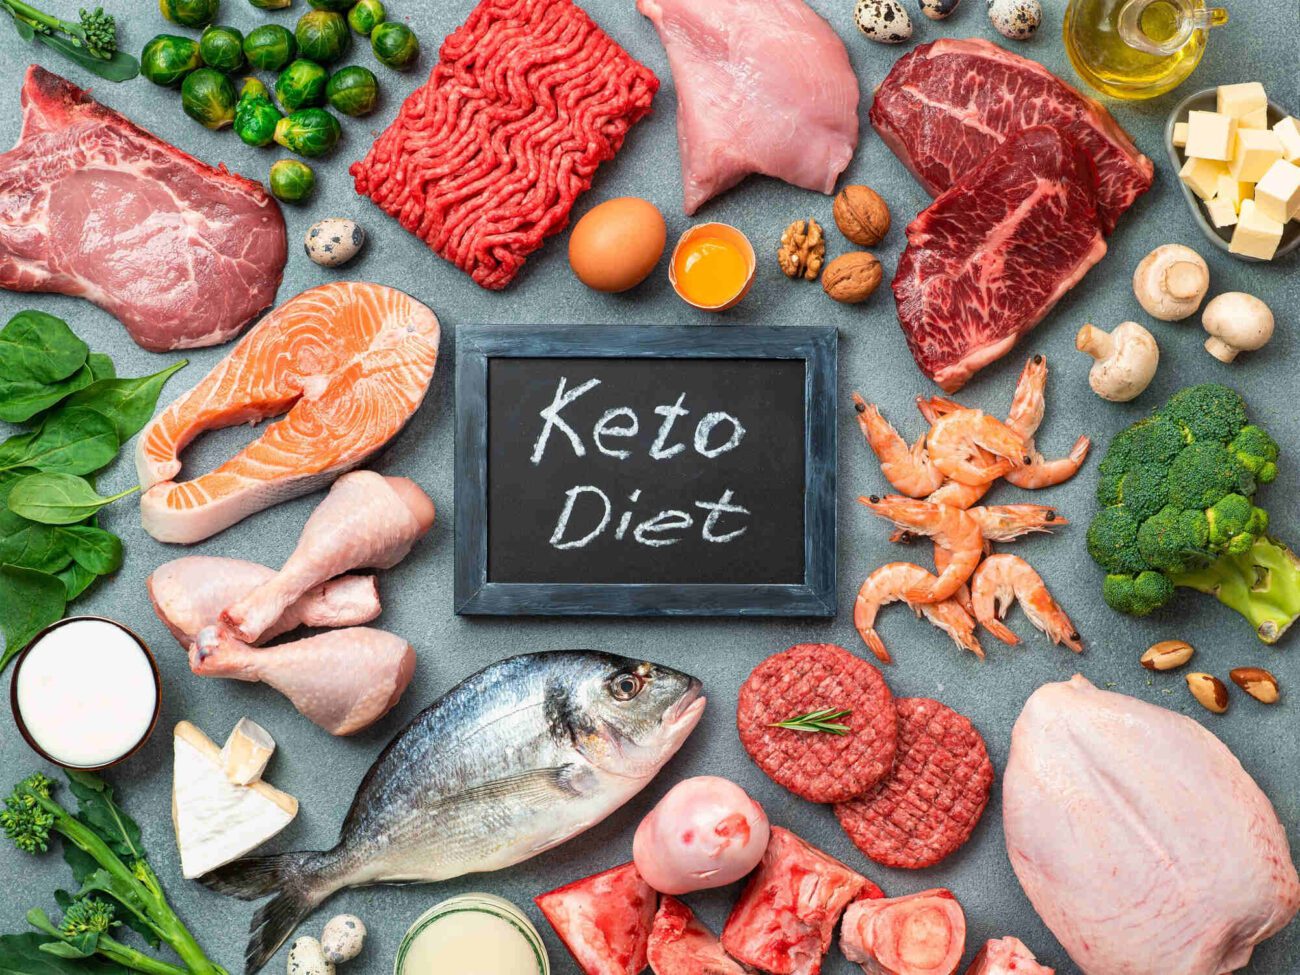 The keto diet works by putting your weight loss on autopilot with ketosis. Want to speed up the process? Could these supplements help you? See our review.